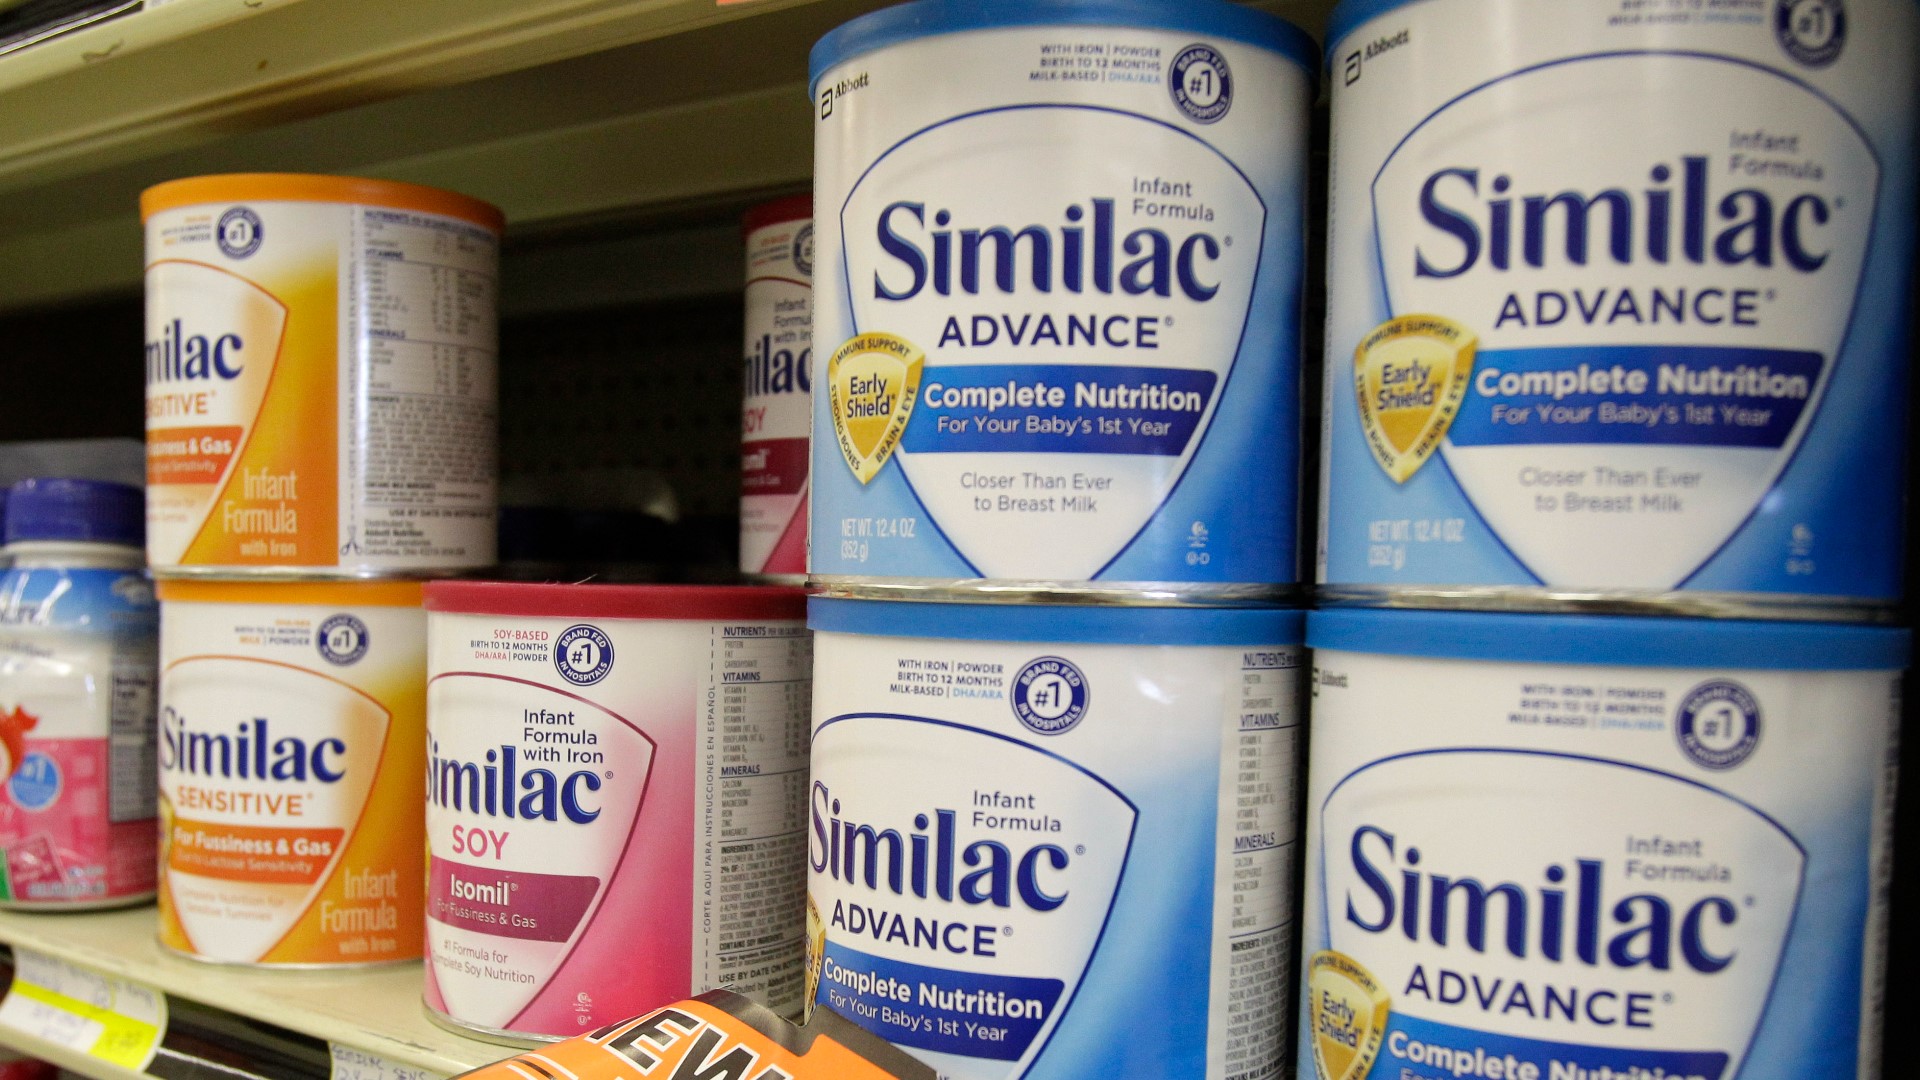 Baby formula shortages have forced some retail chains to limit customers to purchasing just three bottles of formula per transaction.